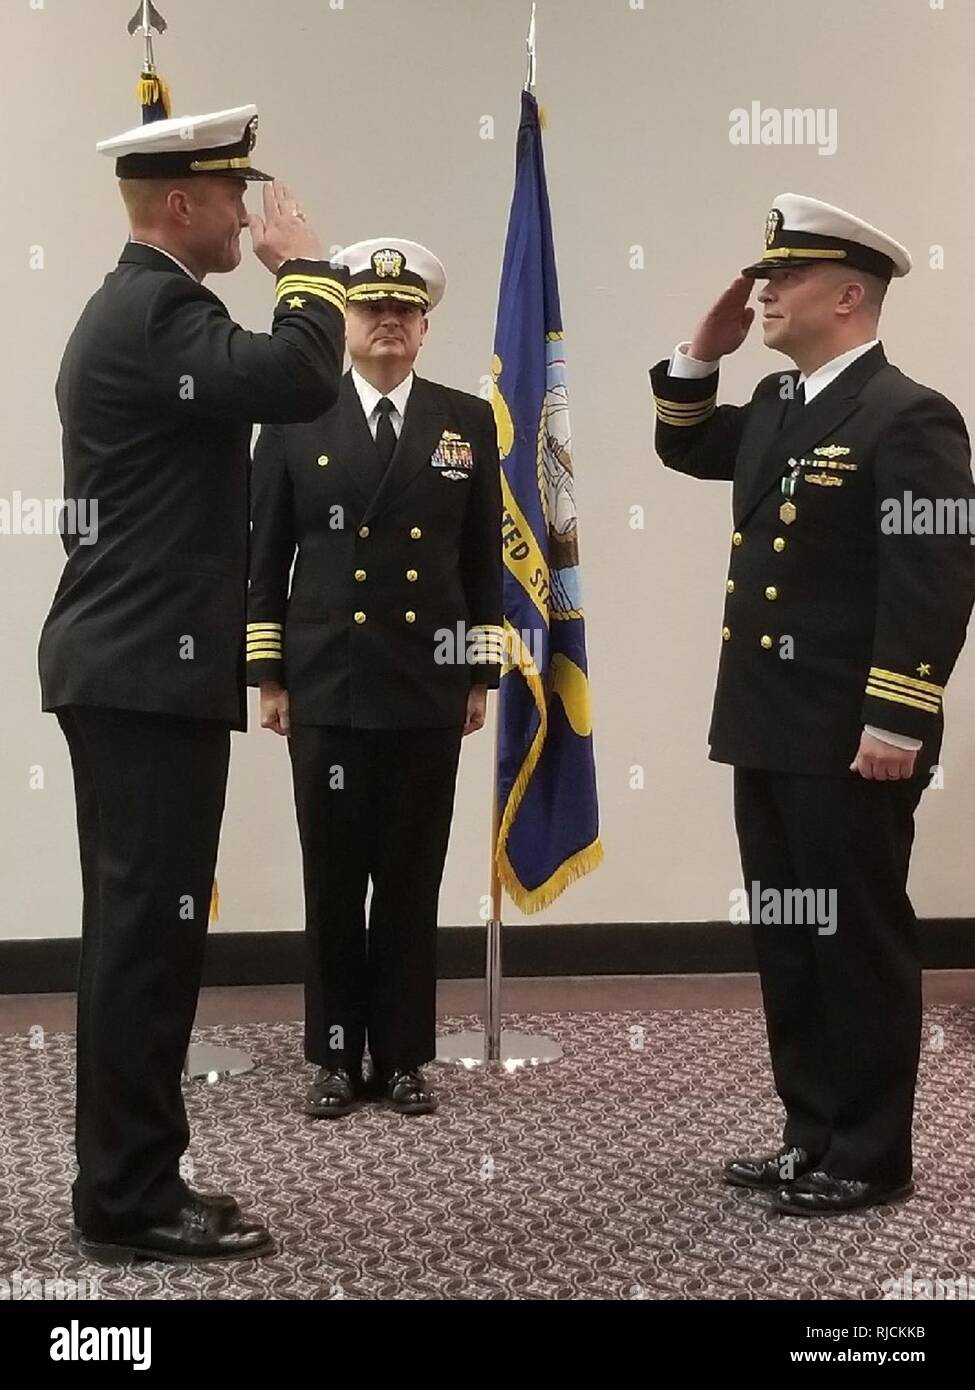 SAN ANGELO, Texas – Capt. Bill Lintz (center) presides over the change of charge ceremony salute between Lt. Cmdr. Christopher Allen (right) and Lt. Cmdr. Austin Maxwell. Allen transferred responsibility as the officer in charge of Center for Information Warfare Training (CIWT) Detachment Goodfellow to Maxwell. Stock Photo